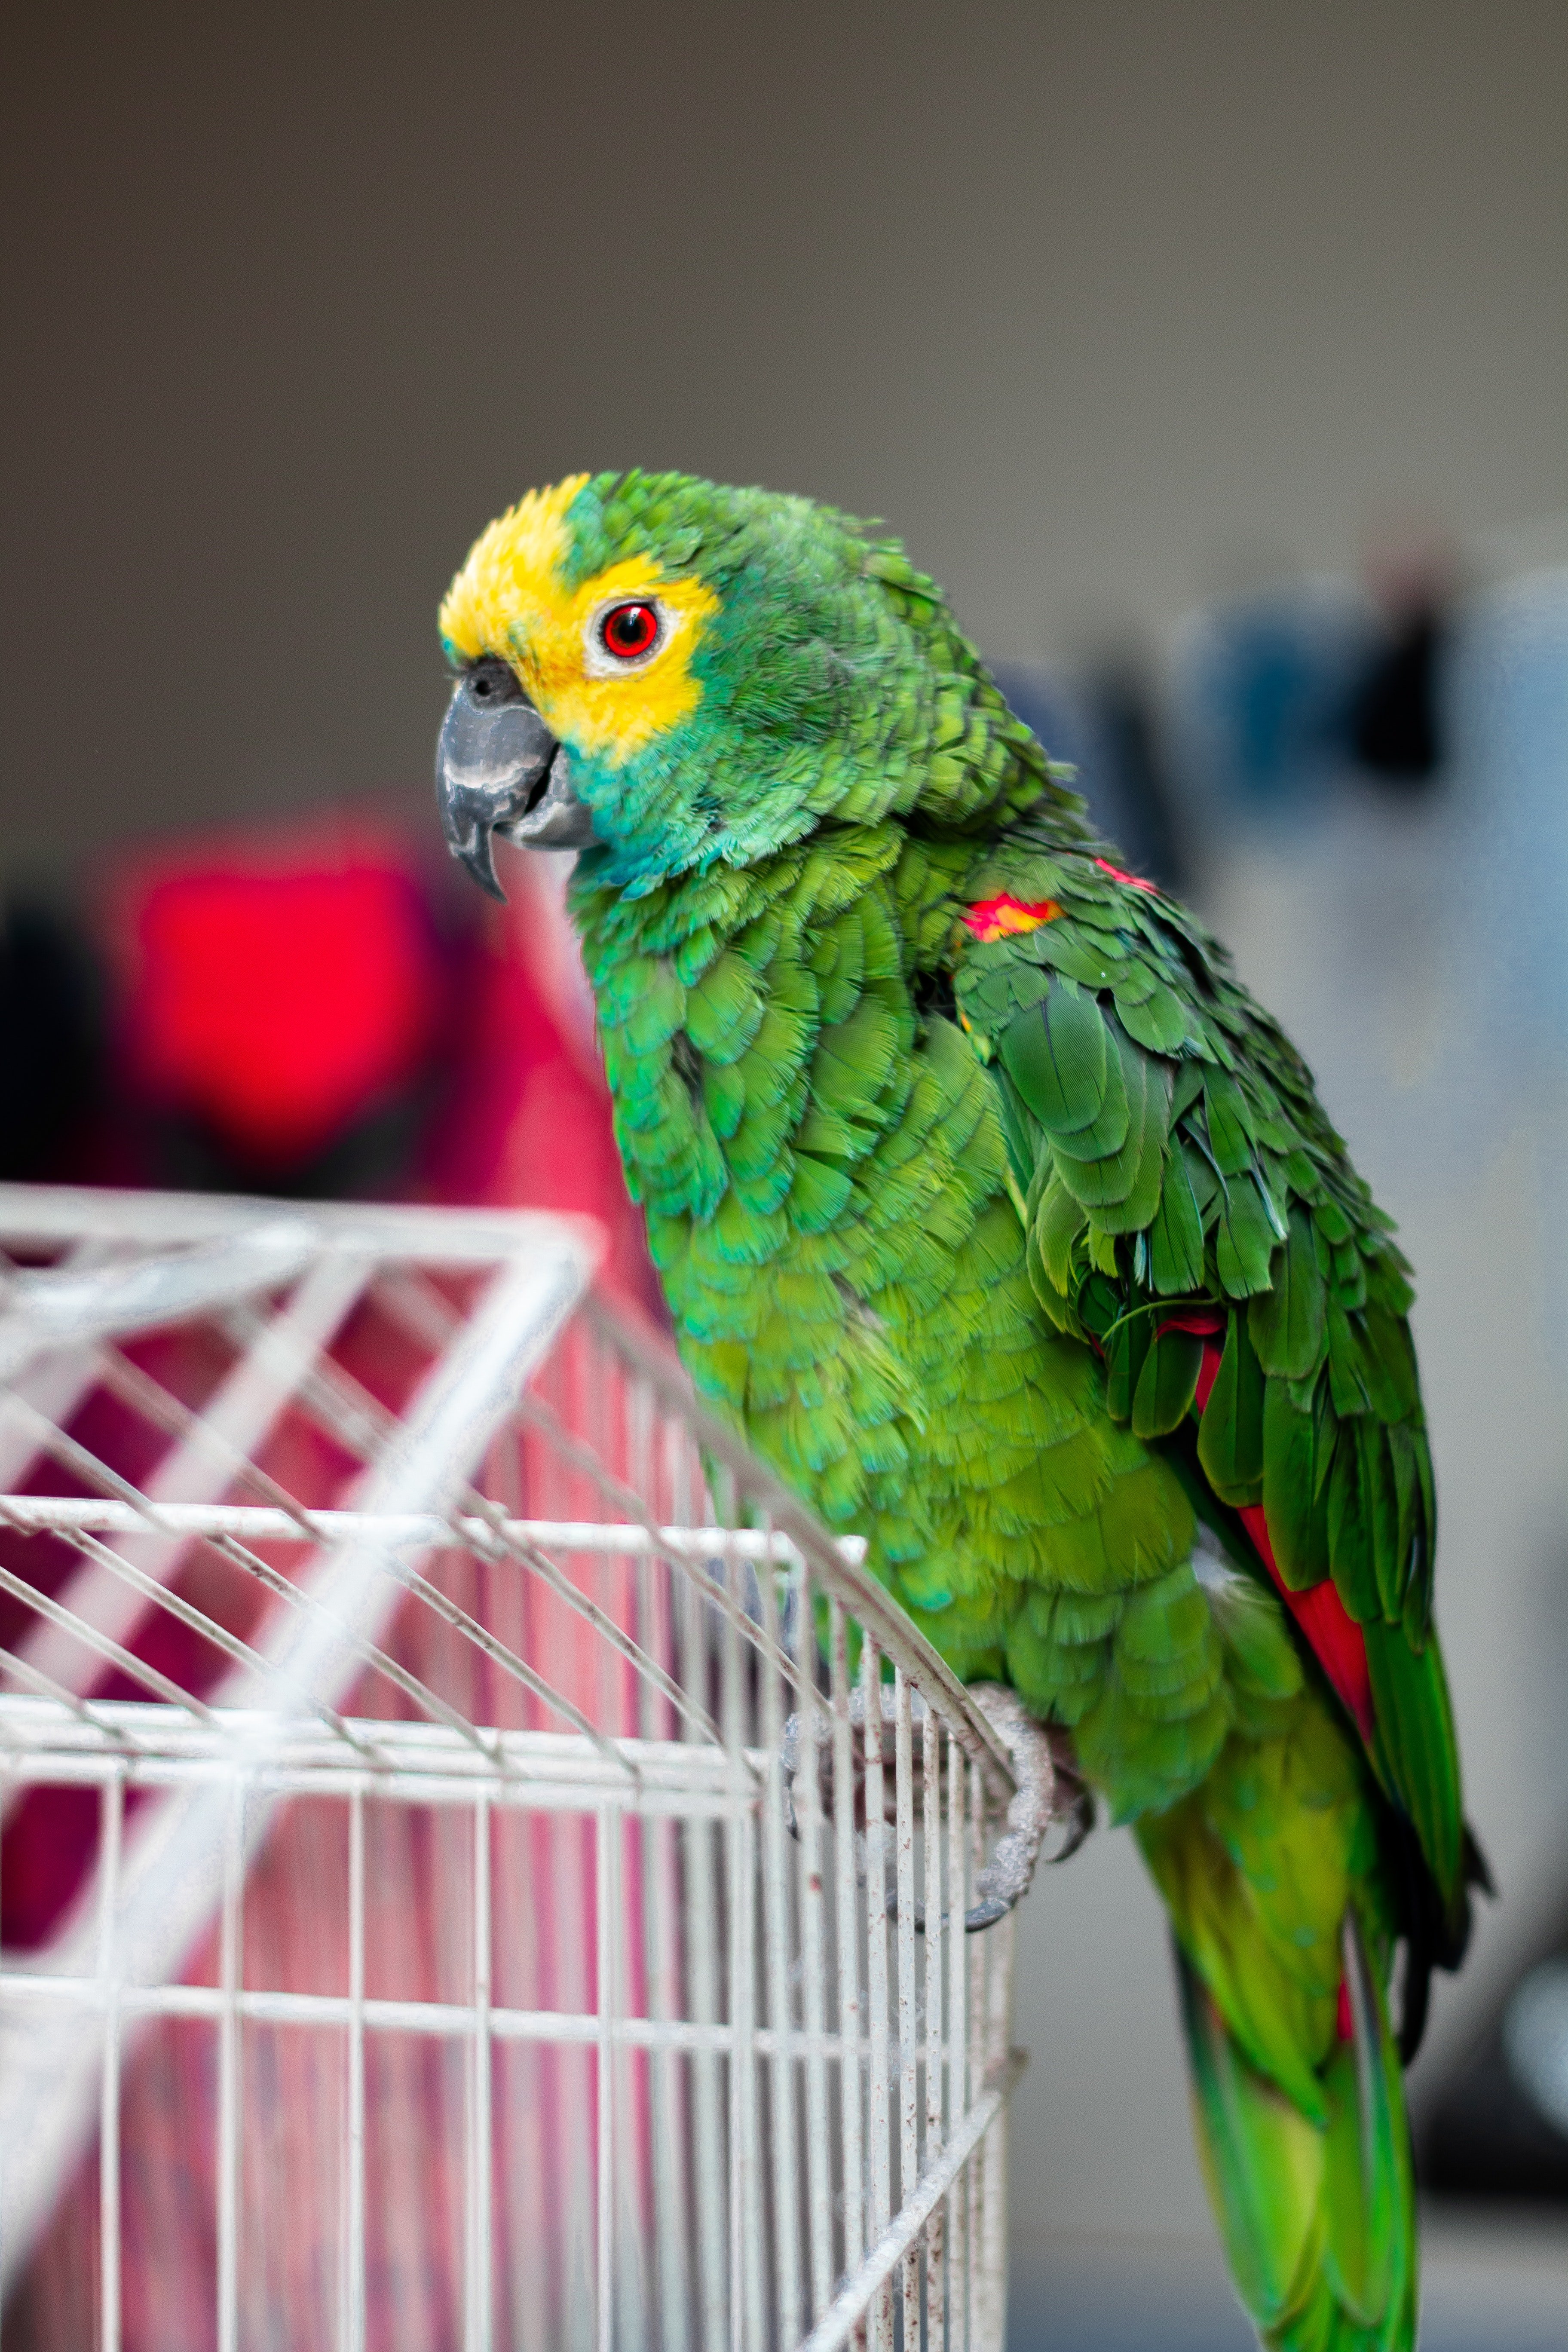 Jane removed the heap of blankets that had spilled down the side of the bed to reveal a birdcage that held a parrot | Source: Pexels